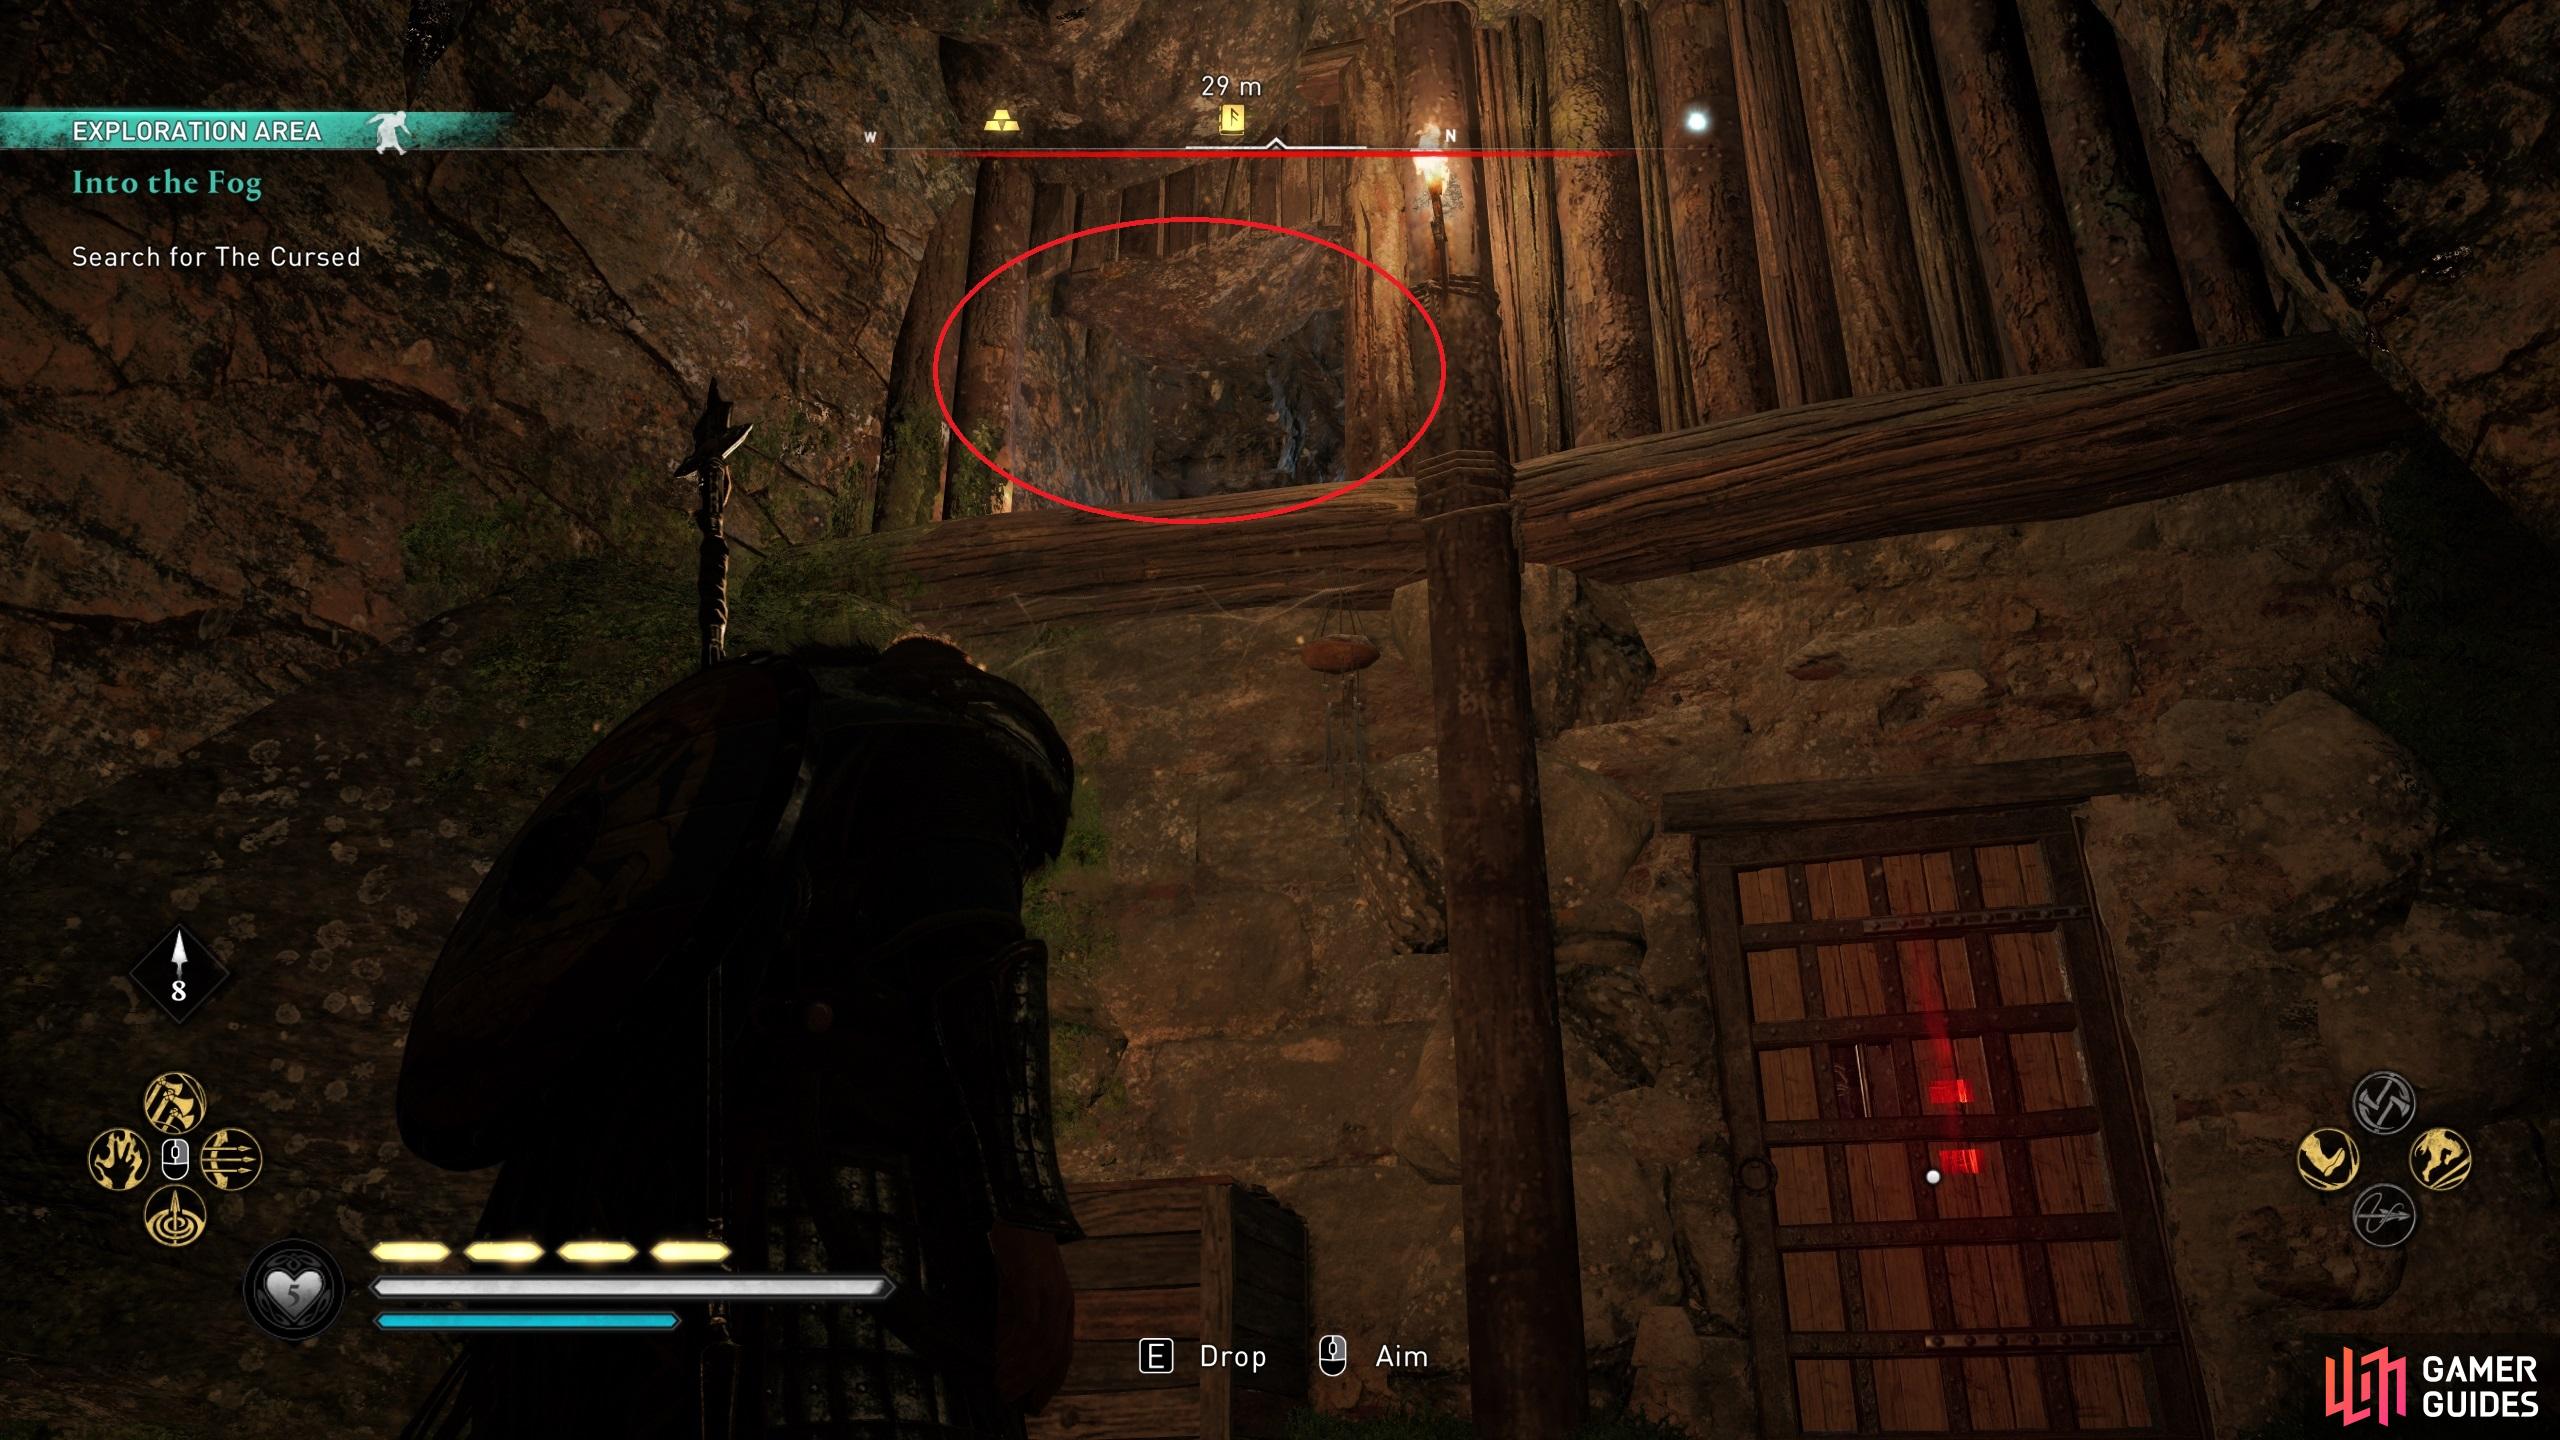 You can enter the hideout through the hole in the wall above the door.